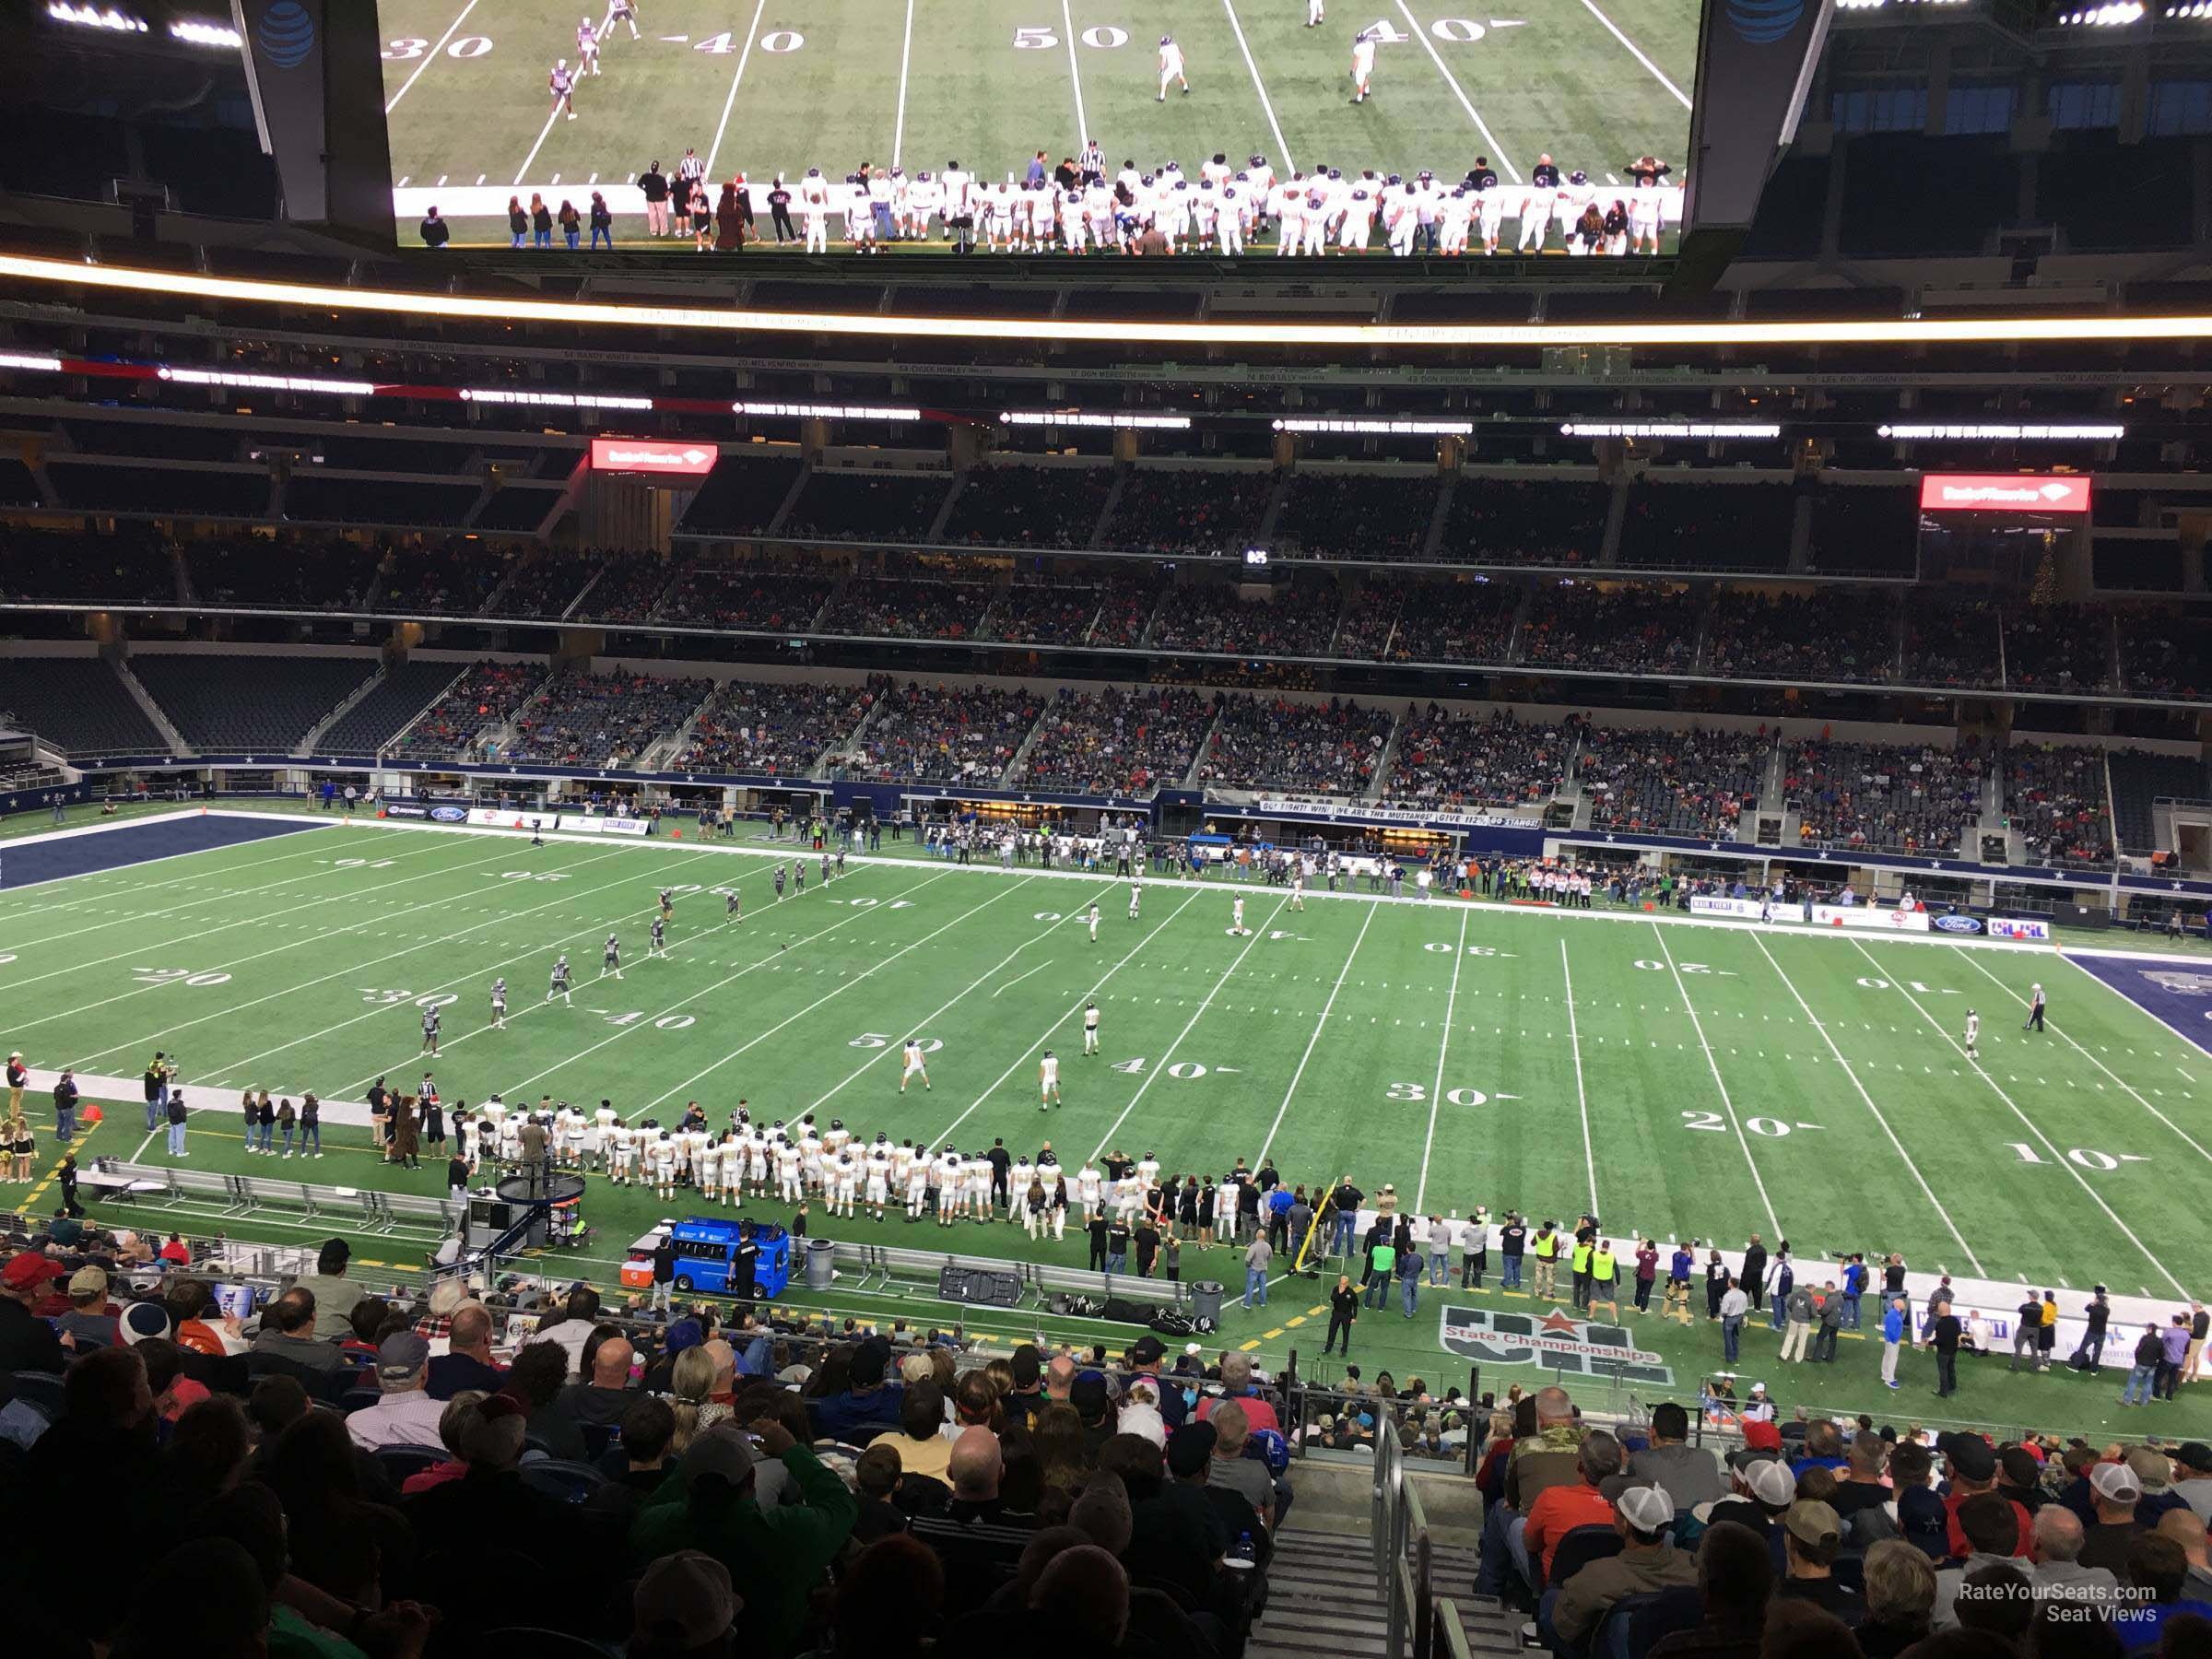 section c234, row 14 seat view  for football - at&t stadium (cowboys stadium)